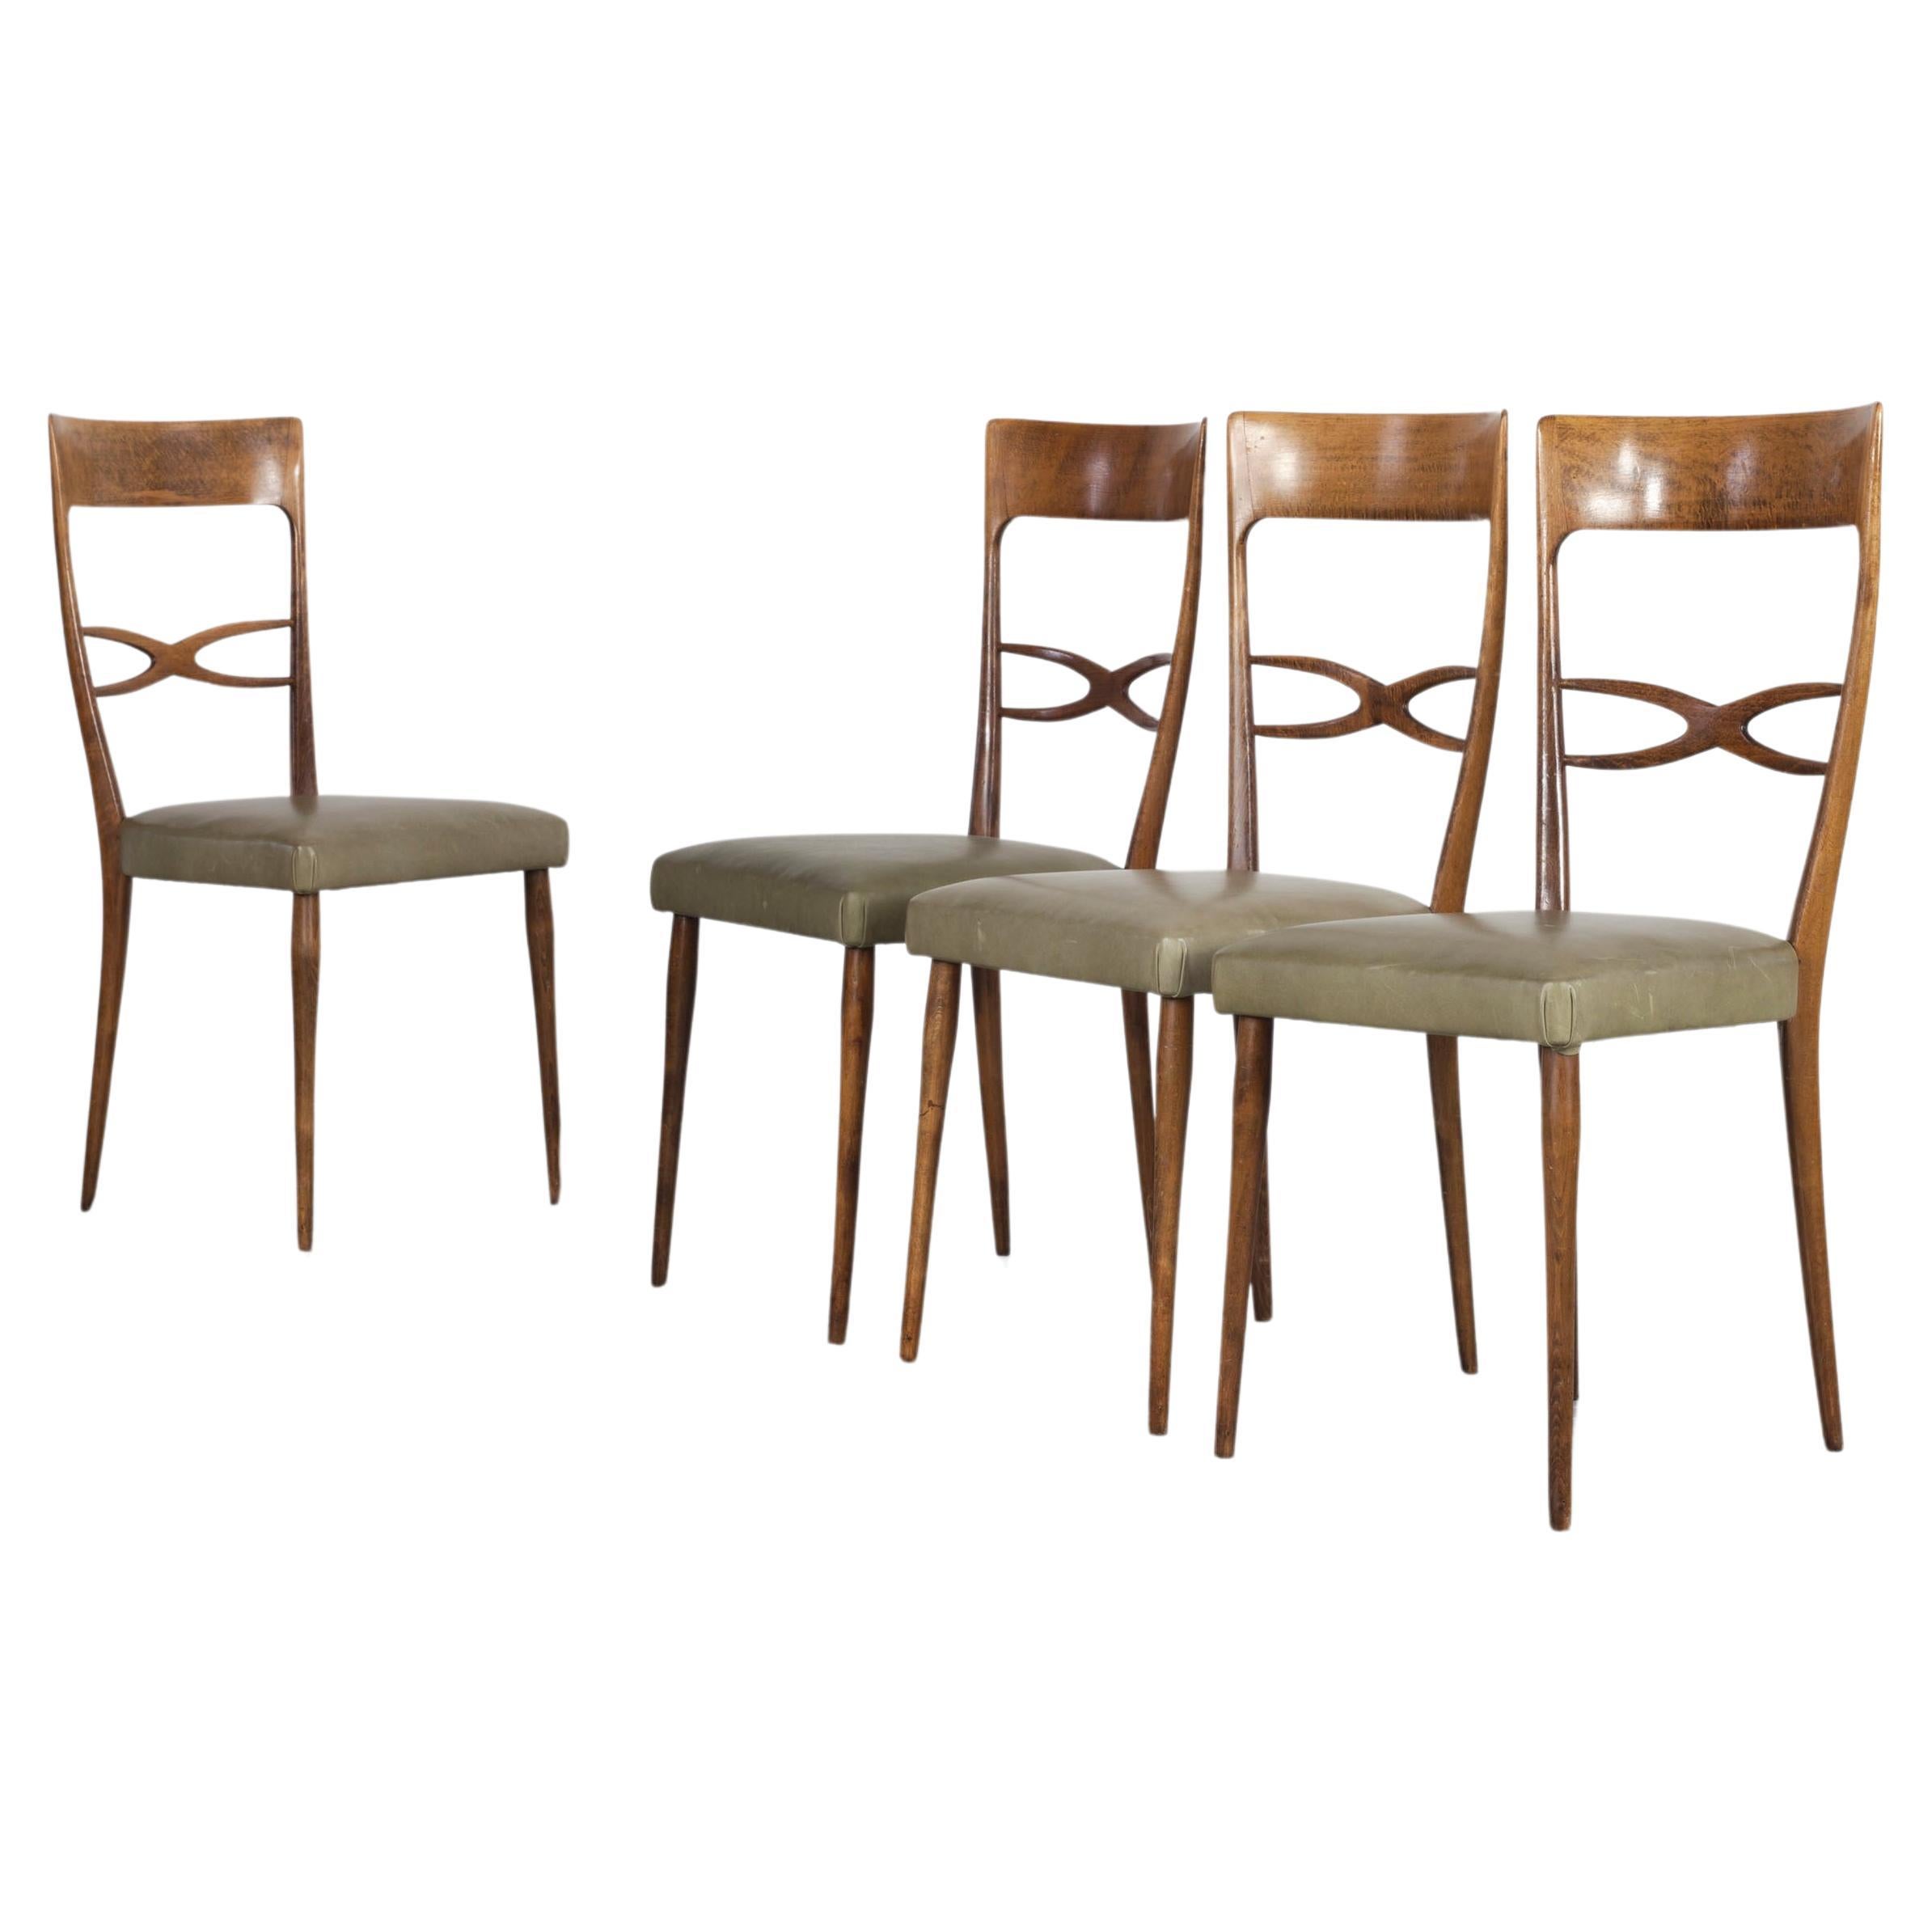 Set of 4 Mid-century dining chairs, made by Consorzio Sedie Friuli, Italy 1950s For Sale